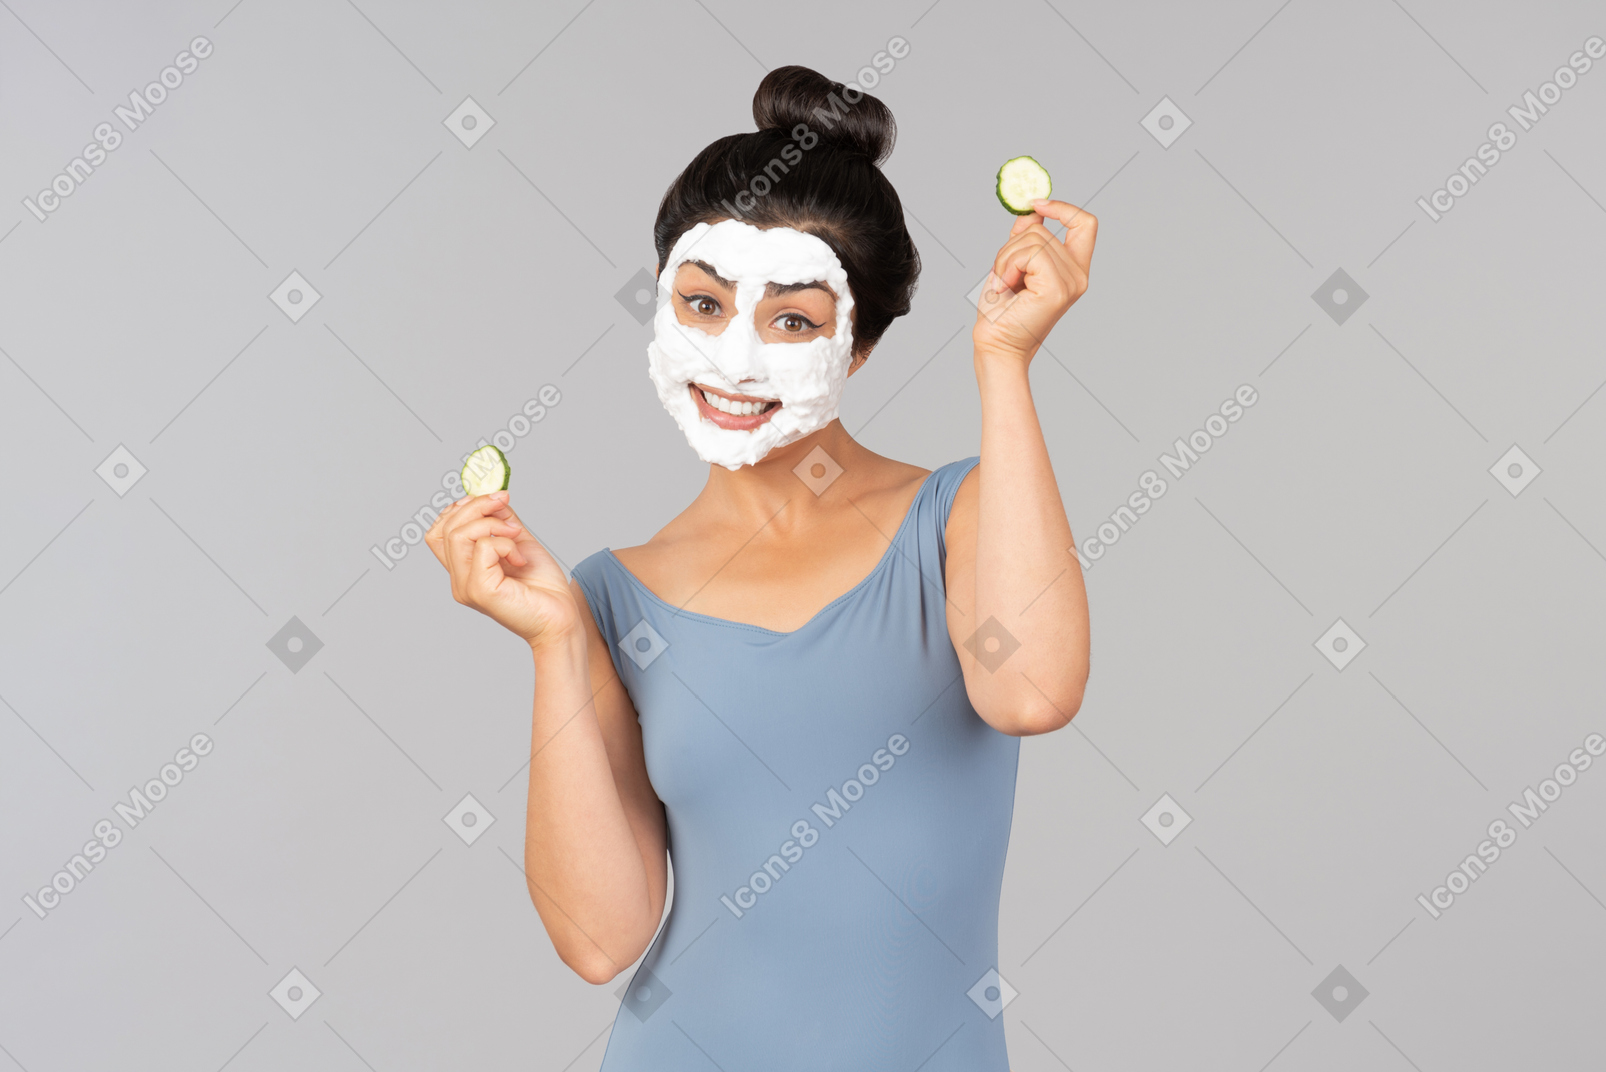 Young woman with white facial mask on holding cucumber slices